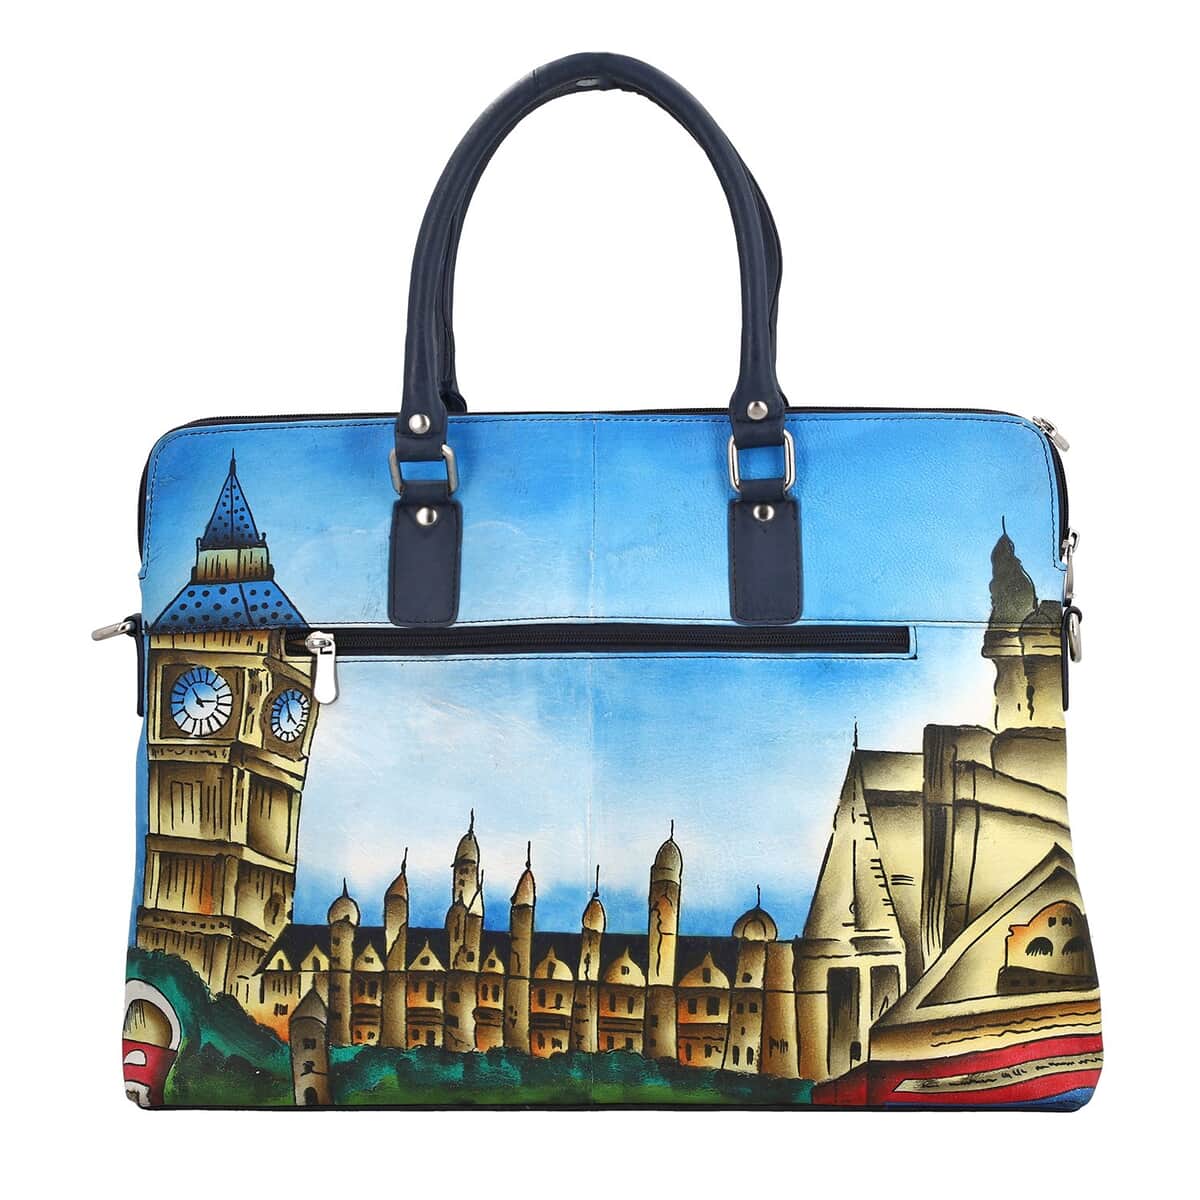 "SUKRITI 100% Genuine Leather Ladies Shoulder Tote Bag (Theme: London City Clock Tower View) Color: Blue Size: 16.5(L)x12.5(H)x3(W) inches" image number 5